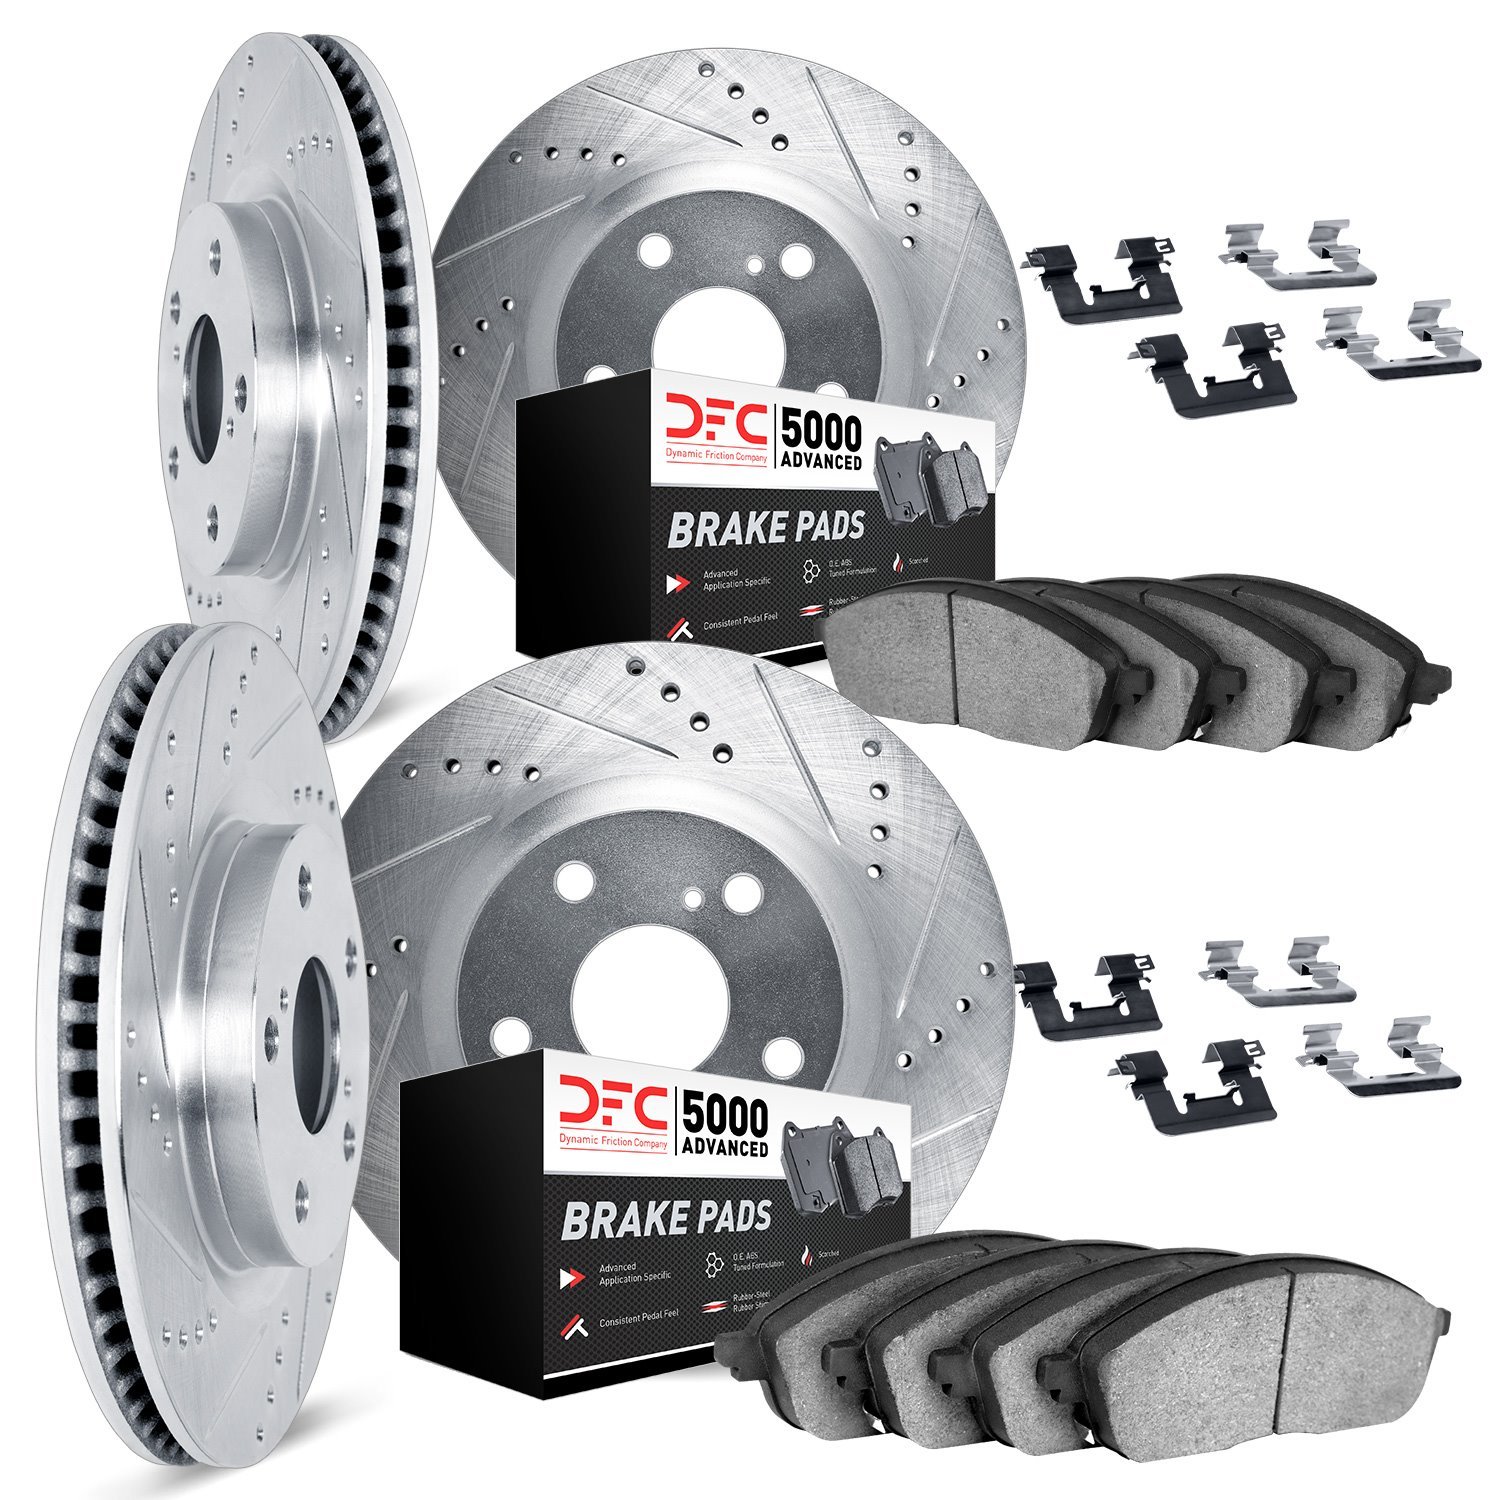 7514-31050 Drilled/Slotted Brake Rotors w/5000 Advanced Brake Pads Kit & Hardware [Silver], 2002-2006 BMW, Position: Front and R